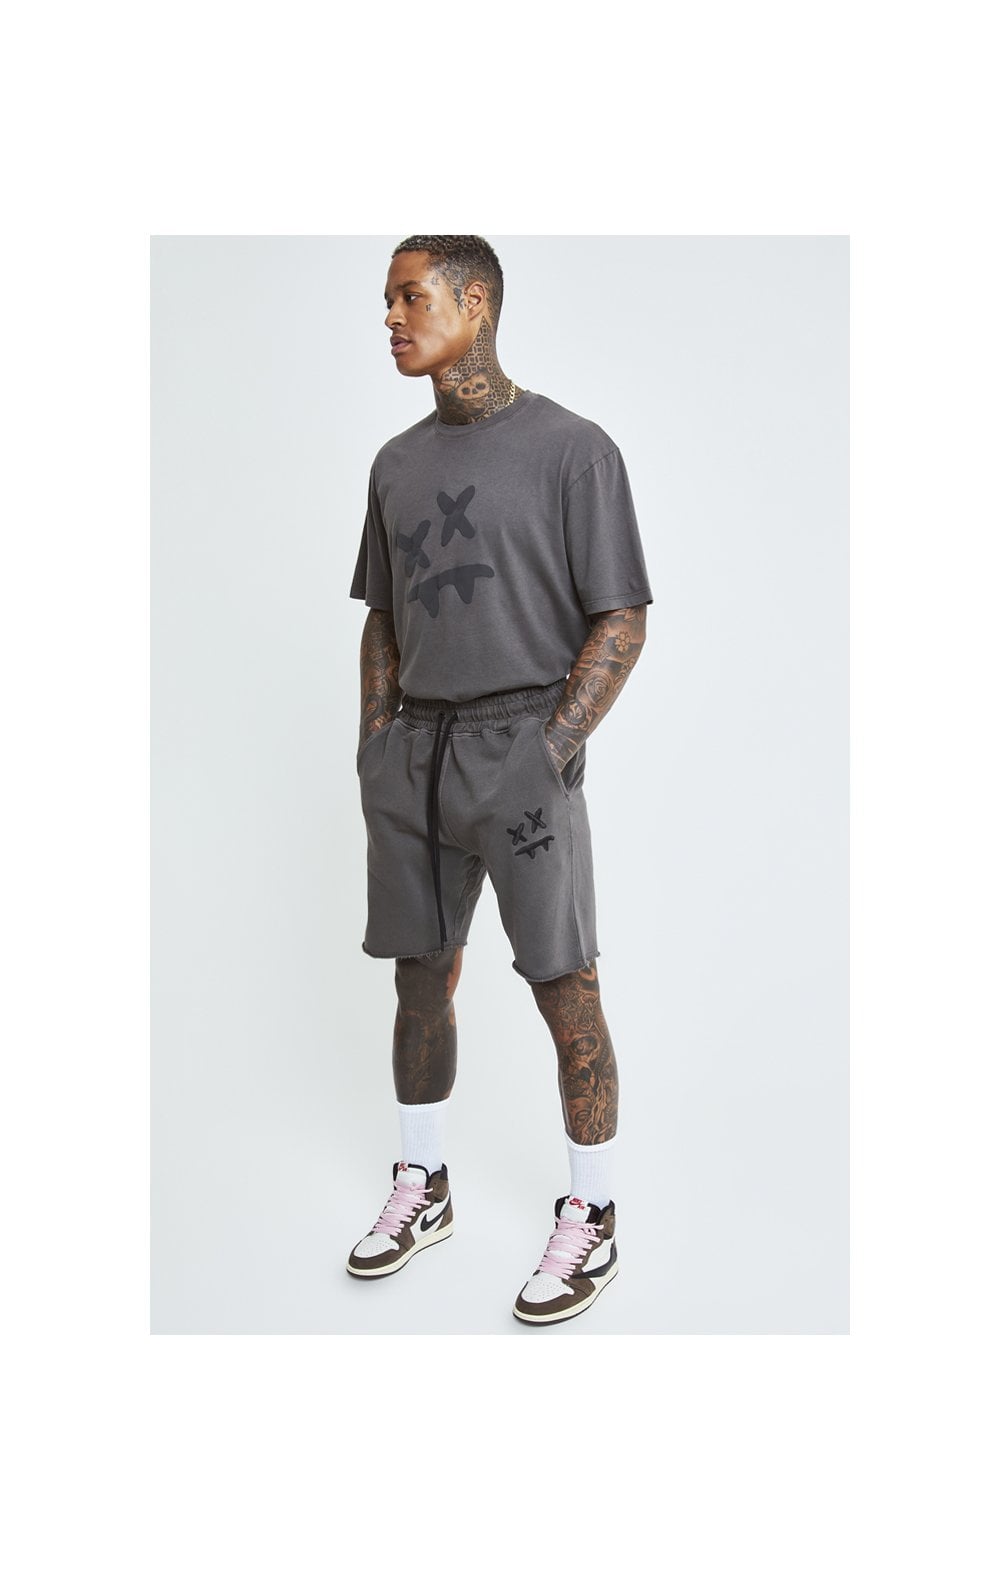 SikSilk X Steve Aoki S/S Oversize Essential Tee – Washed Grey (2)